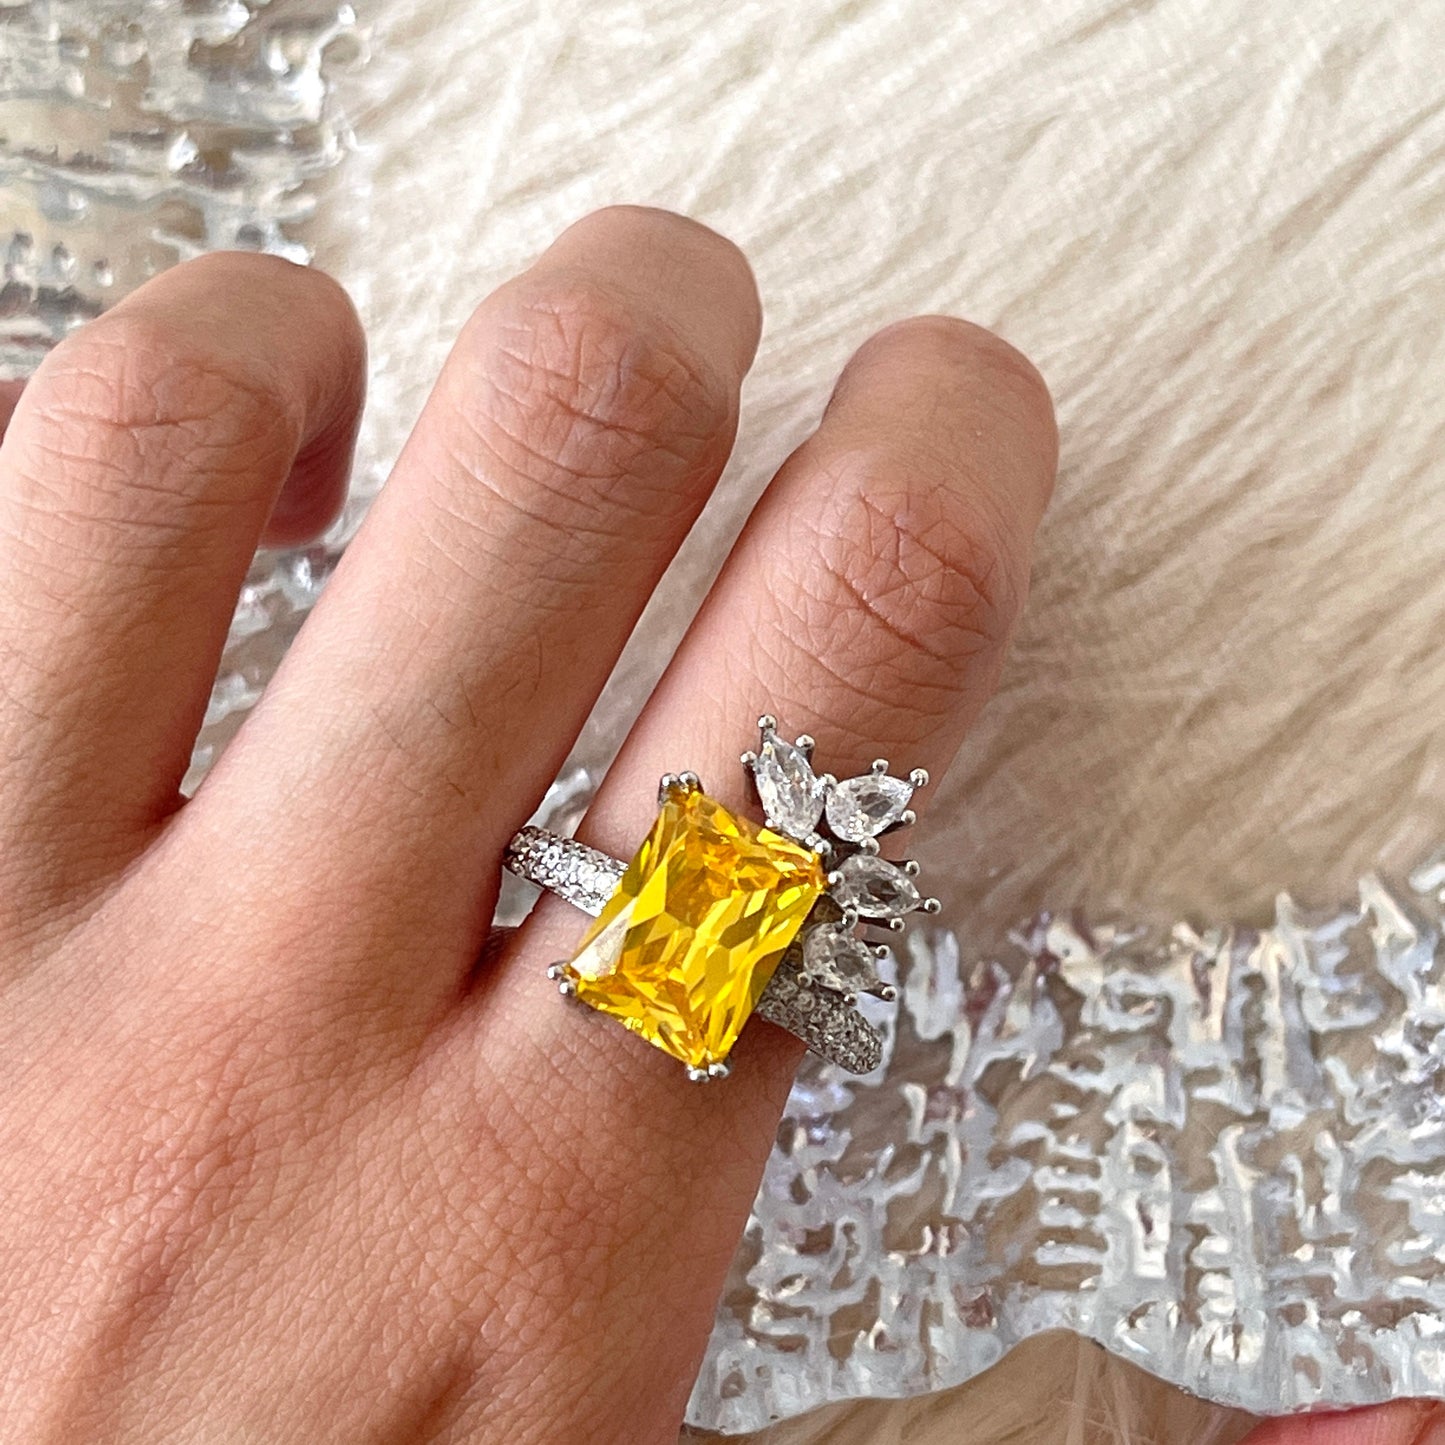 Yellow Diamond Ring, Lab-created Diamond Ring, Celebrity Ring, Vine Leaf Yellow Zircon Ring, Statement Promise Ring, Sterling Silver Ring